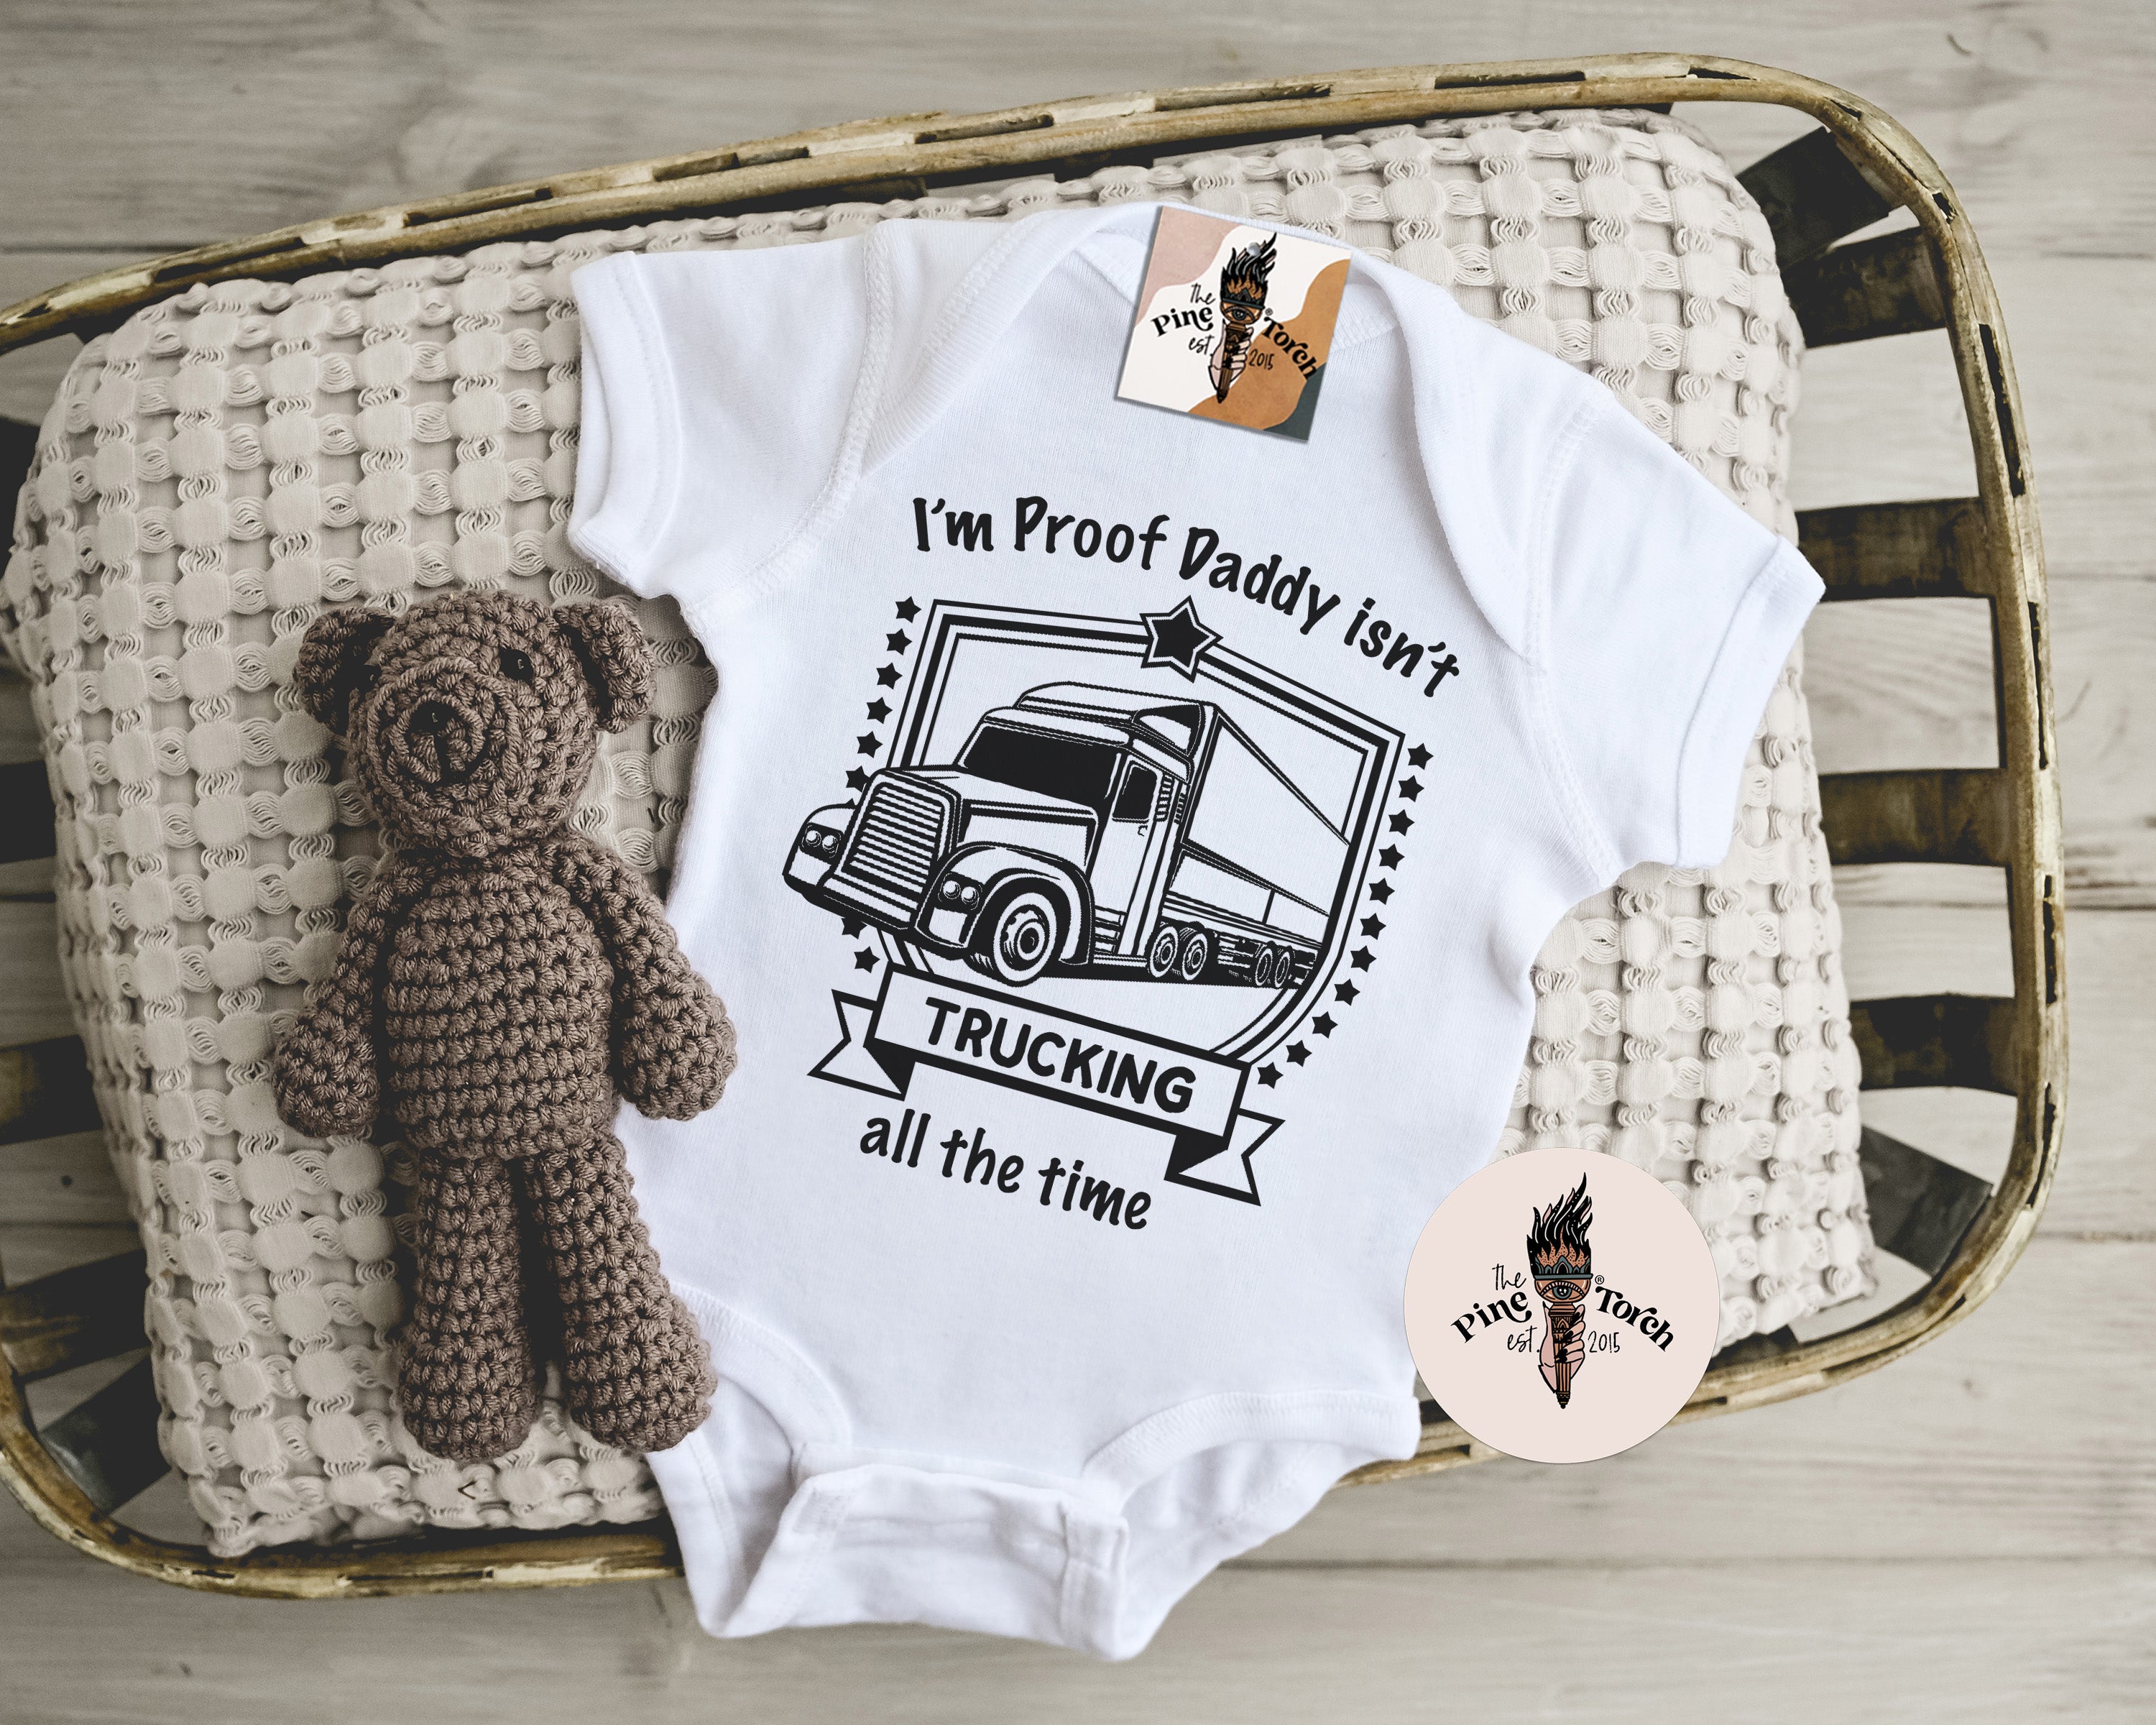 « I'M PROOF DADDY ISN'T TRUCKING ALL THE TIME » BODYSUIT